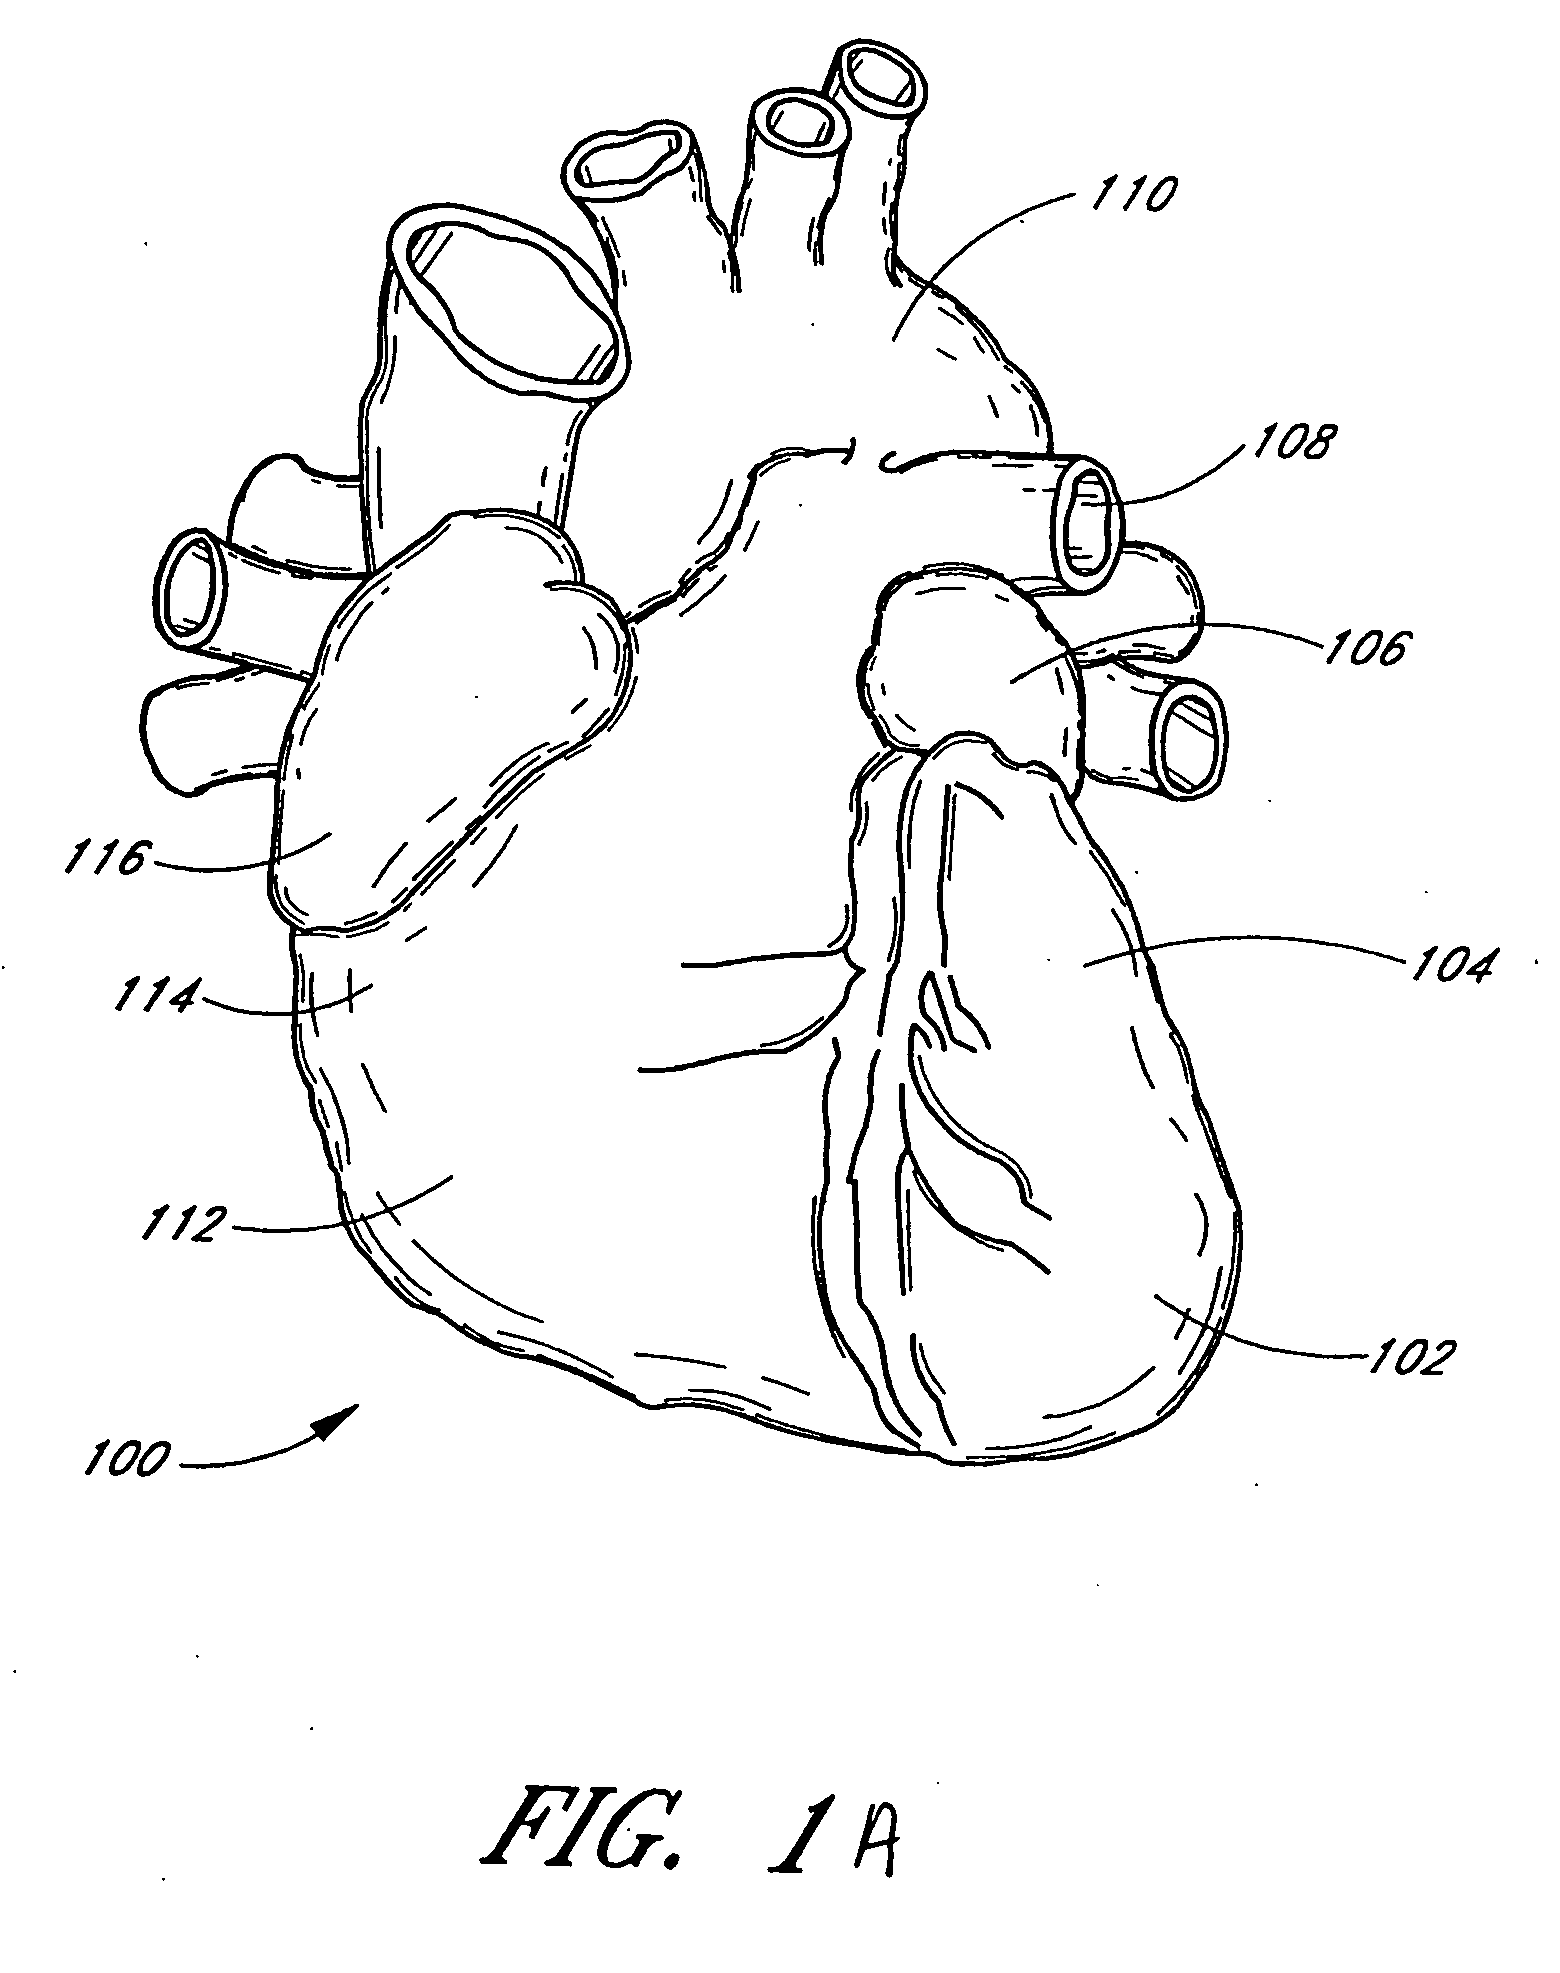 Intracardiac cage and method of delivering same